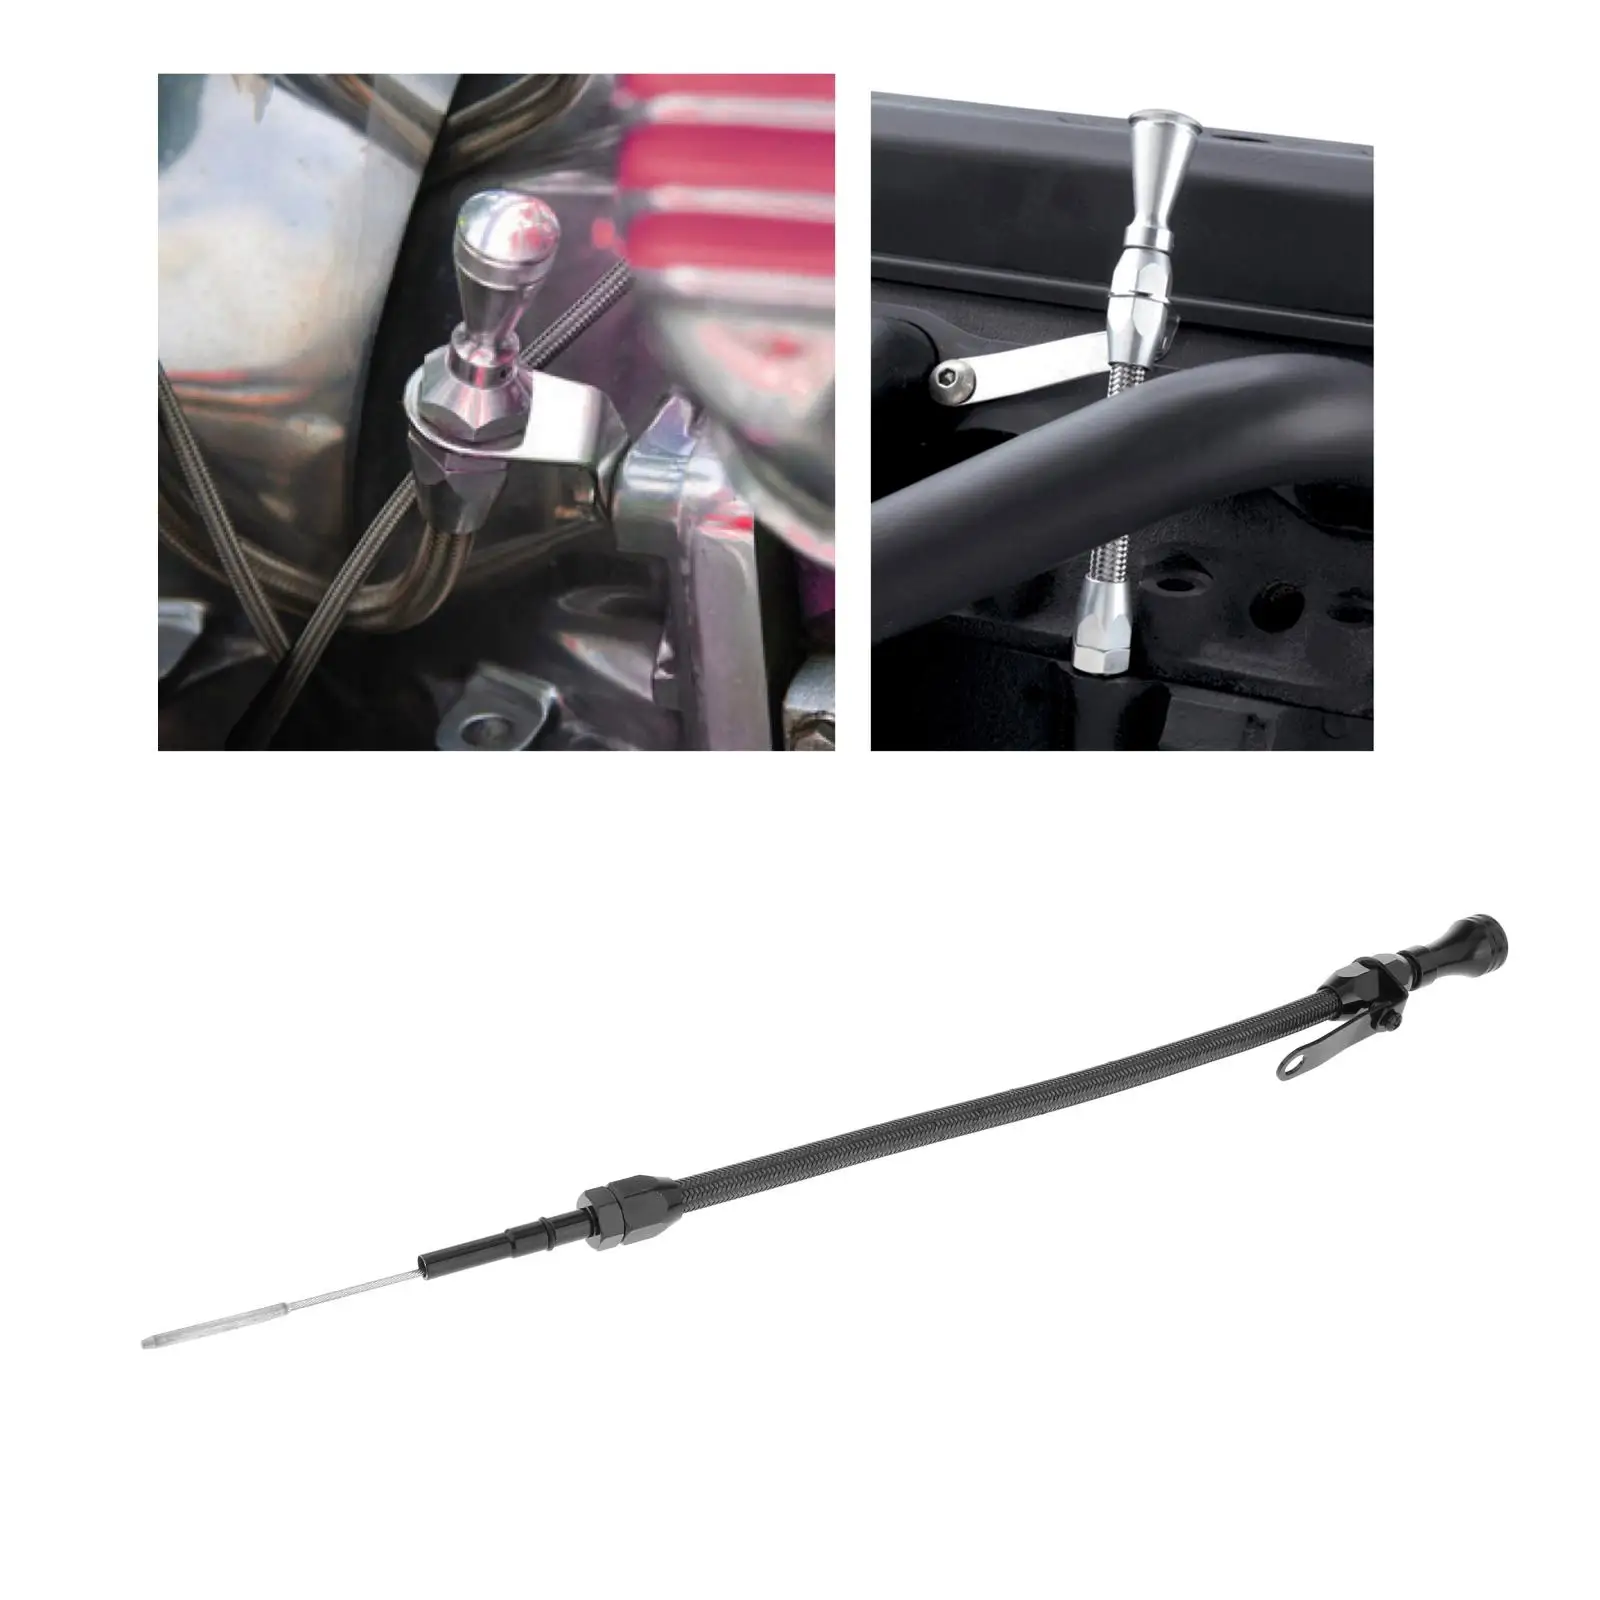 LS Engine Dipstick for Holden Commodore VX 5.7L V8 Engines Easy installation